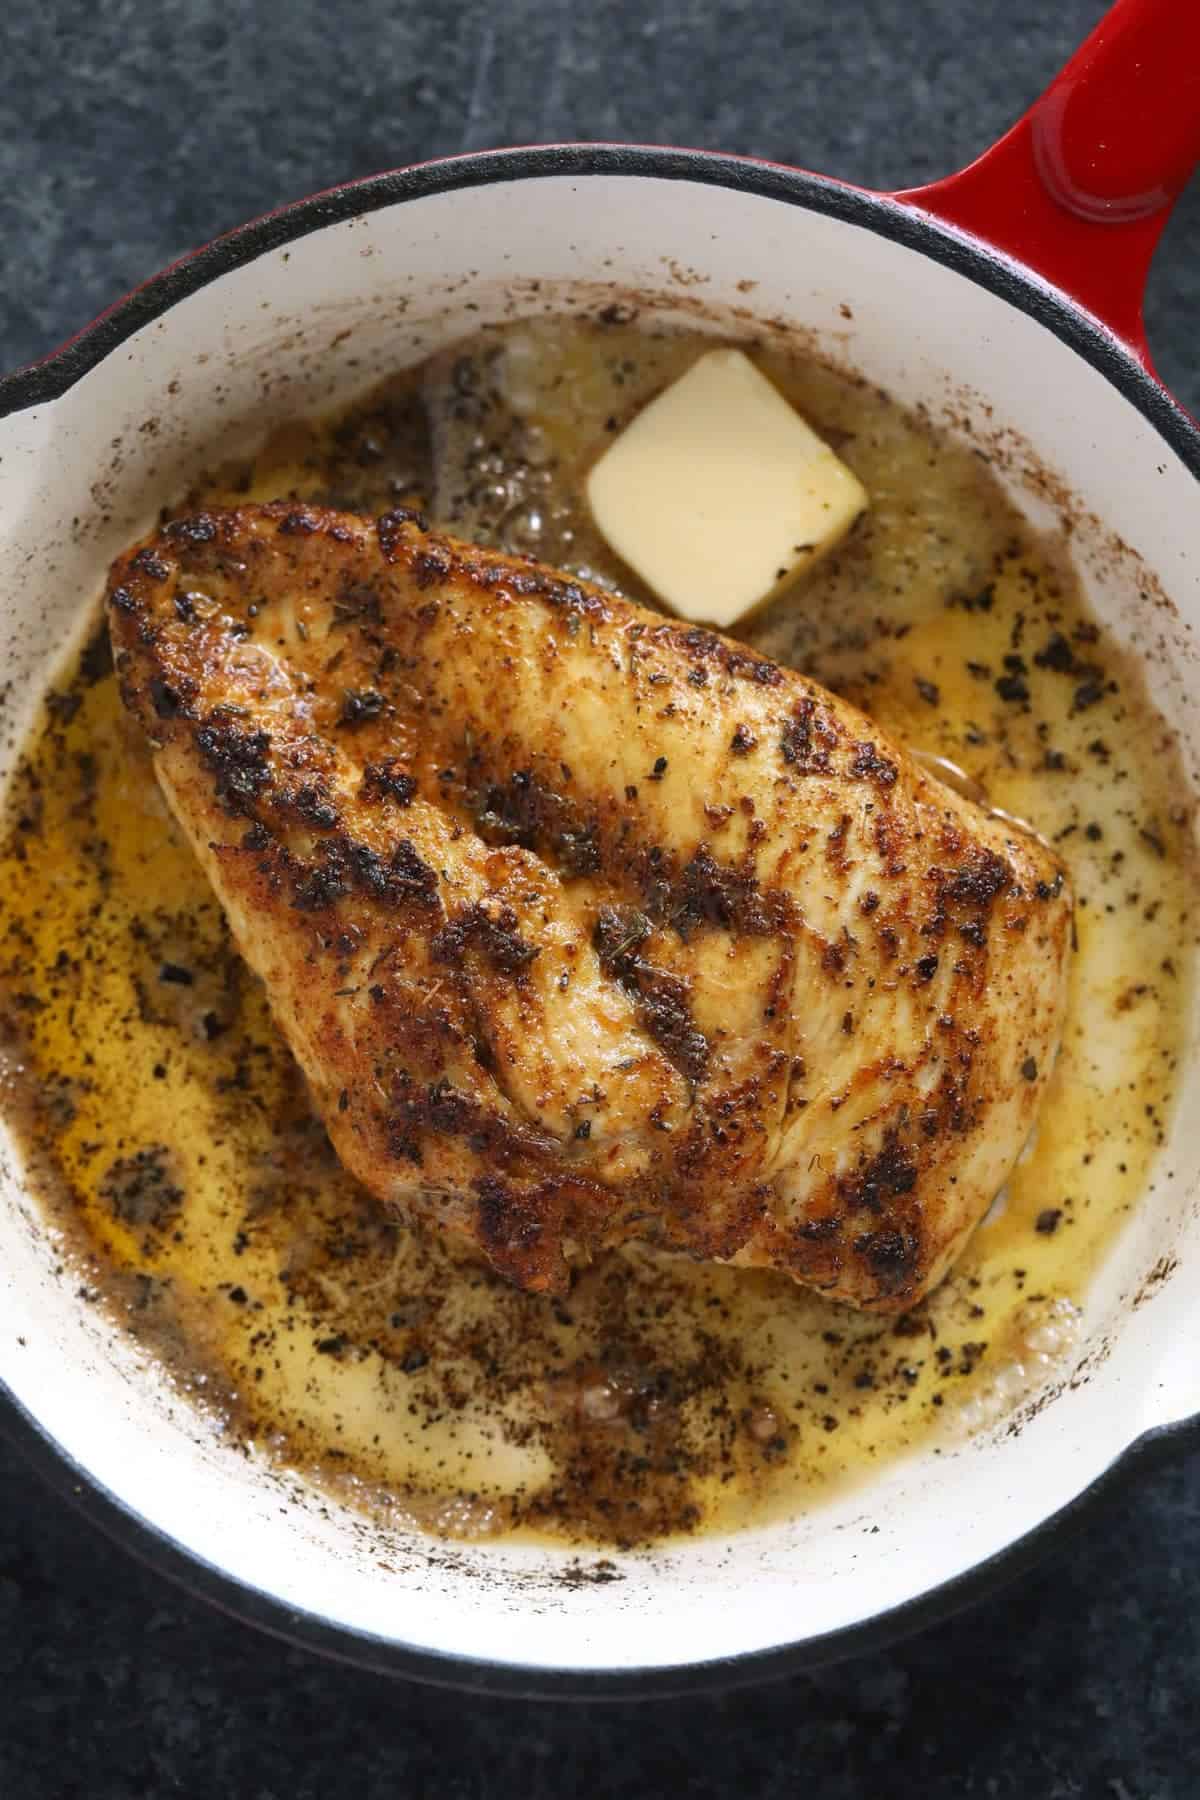 https://fitfoodiefinds.com/wp-content/uploads/2021/03/seared-chicken-1365x2048-2.jpg